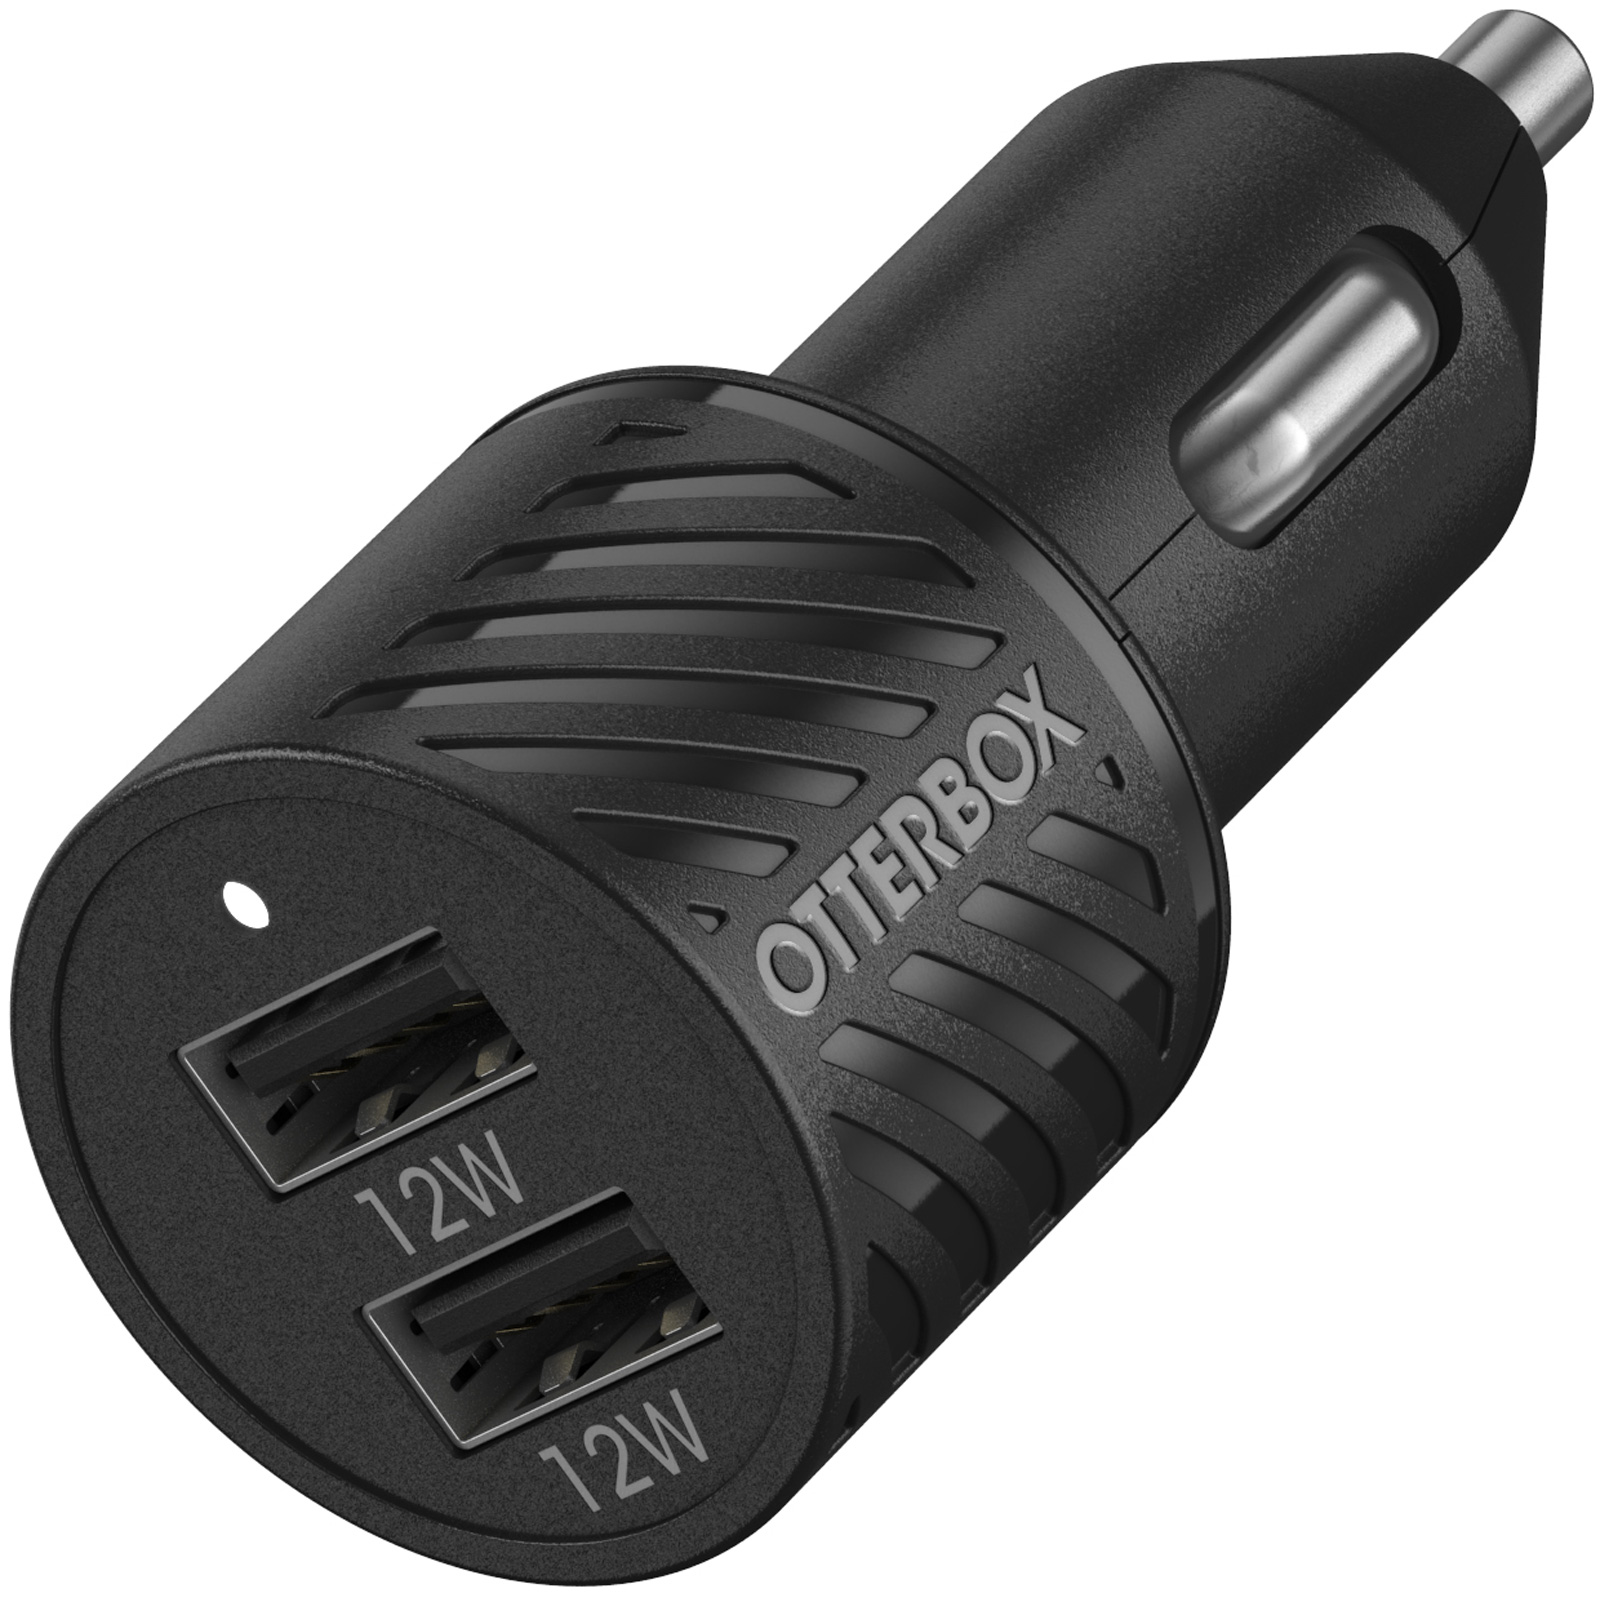   Basics 12W (5V, 2.4A) Car Charger with